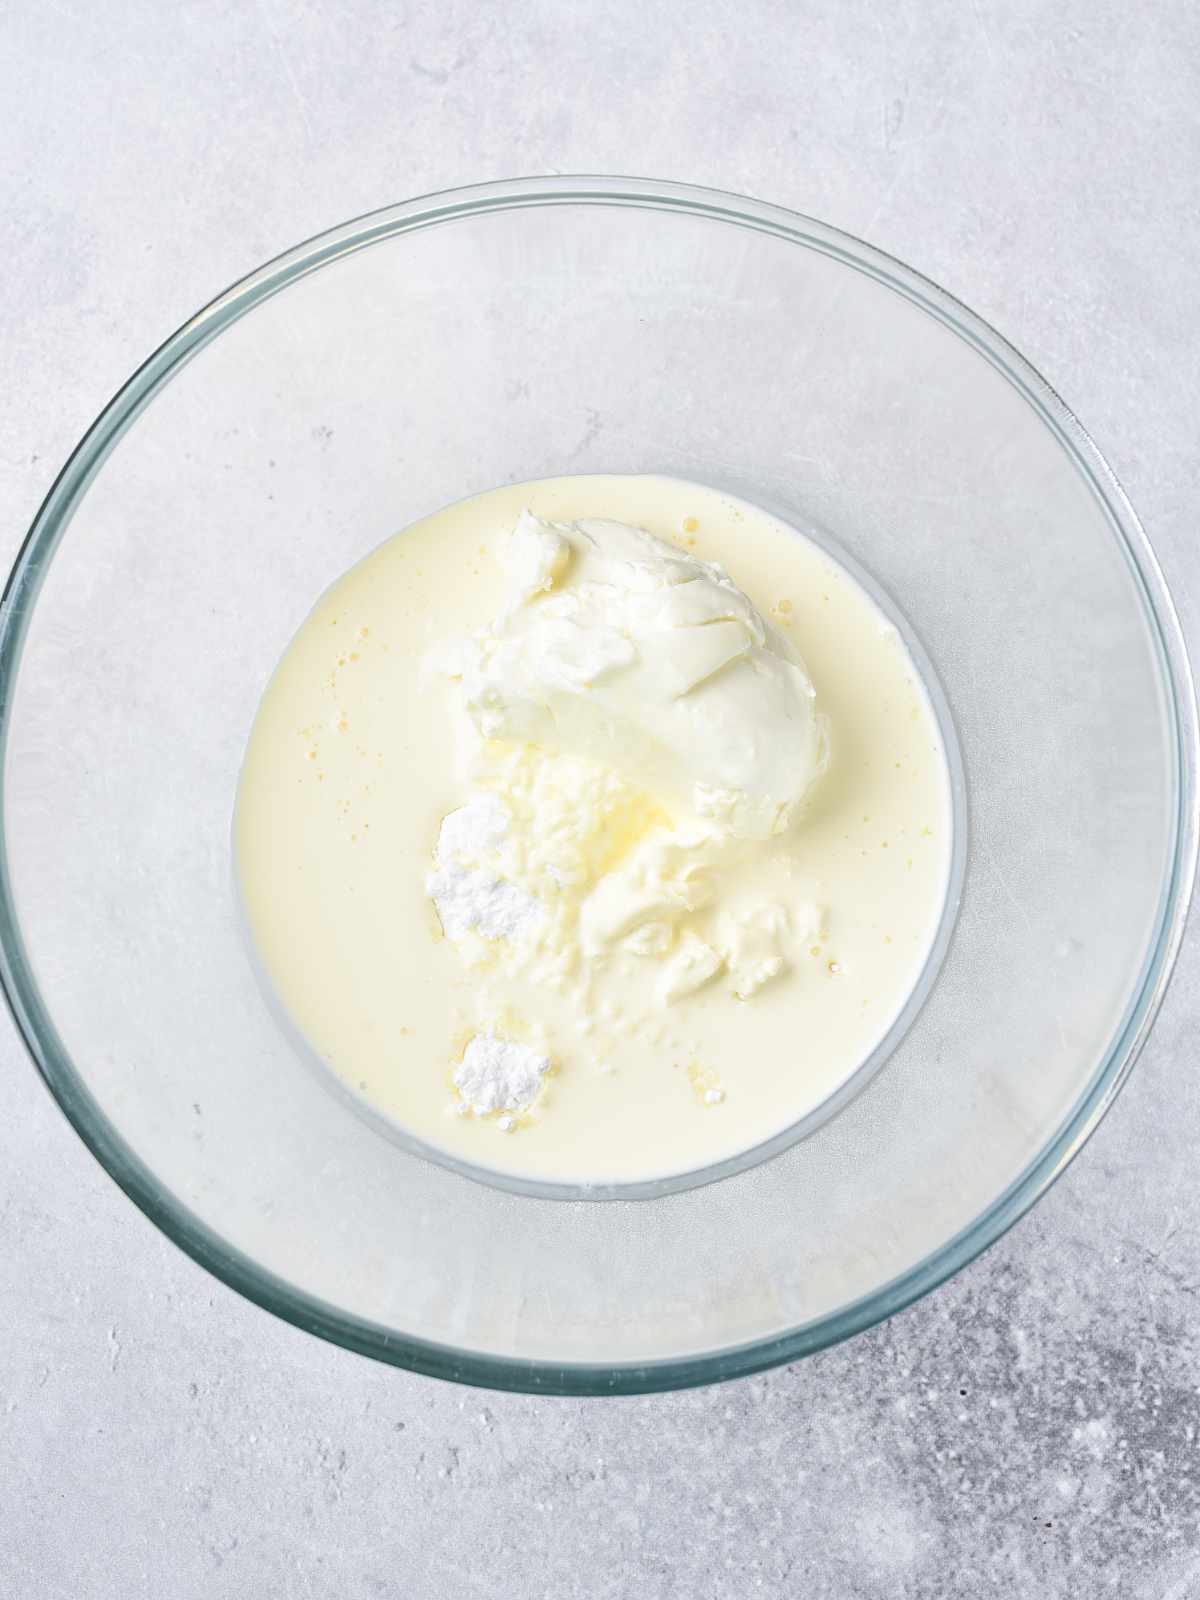 Cream cheese and heavy whipping cream in a bowl.